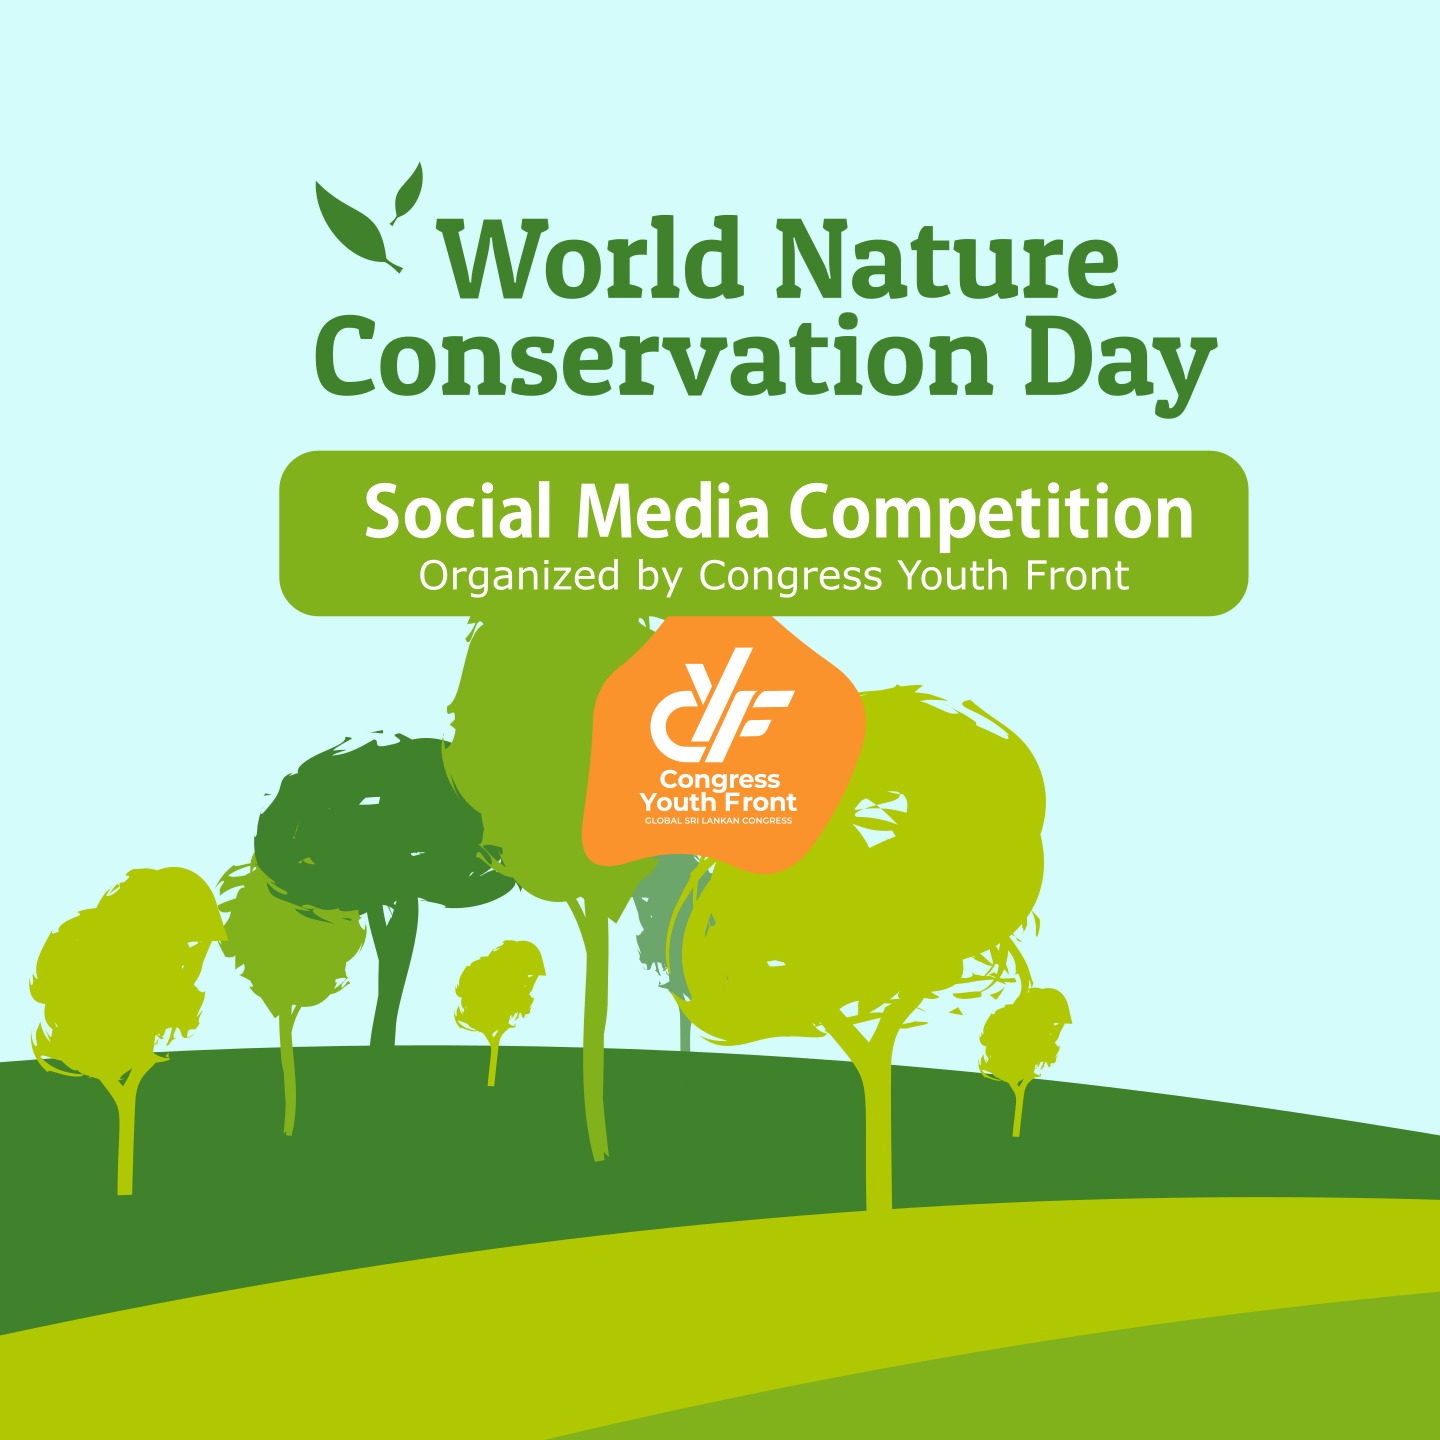 World Nature Conservation Day